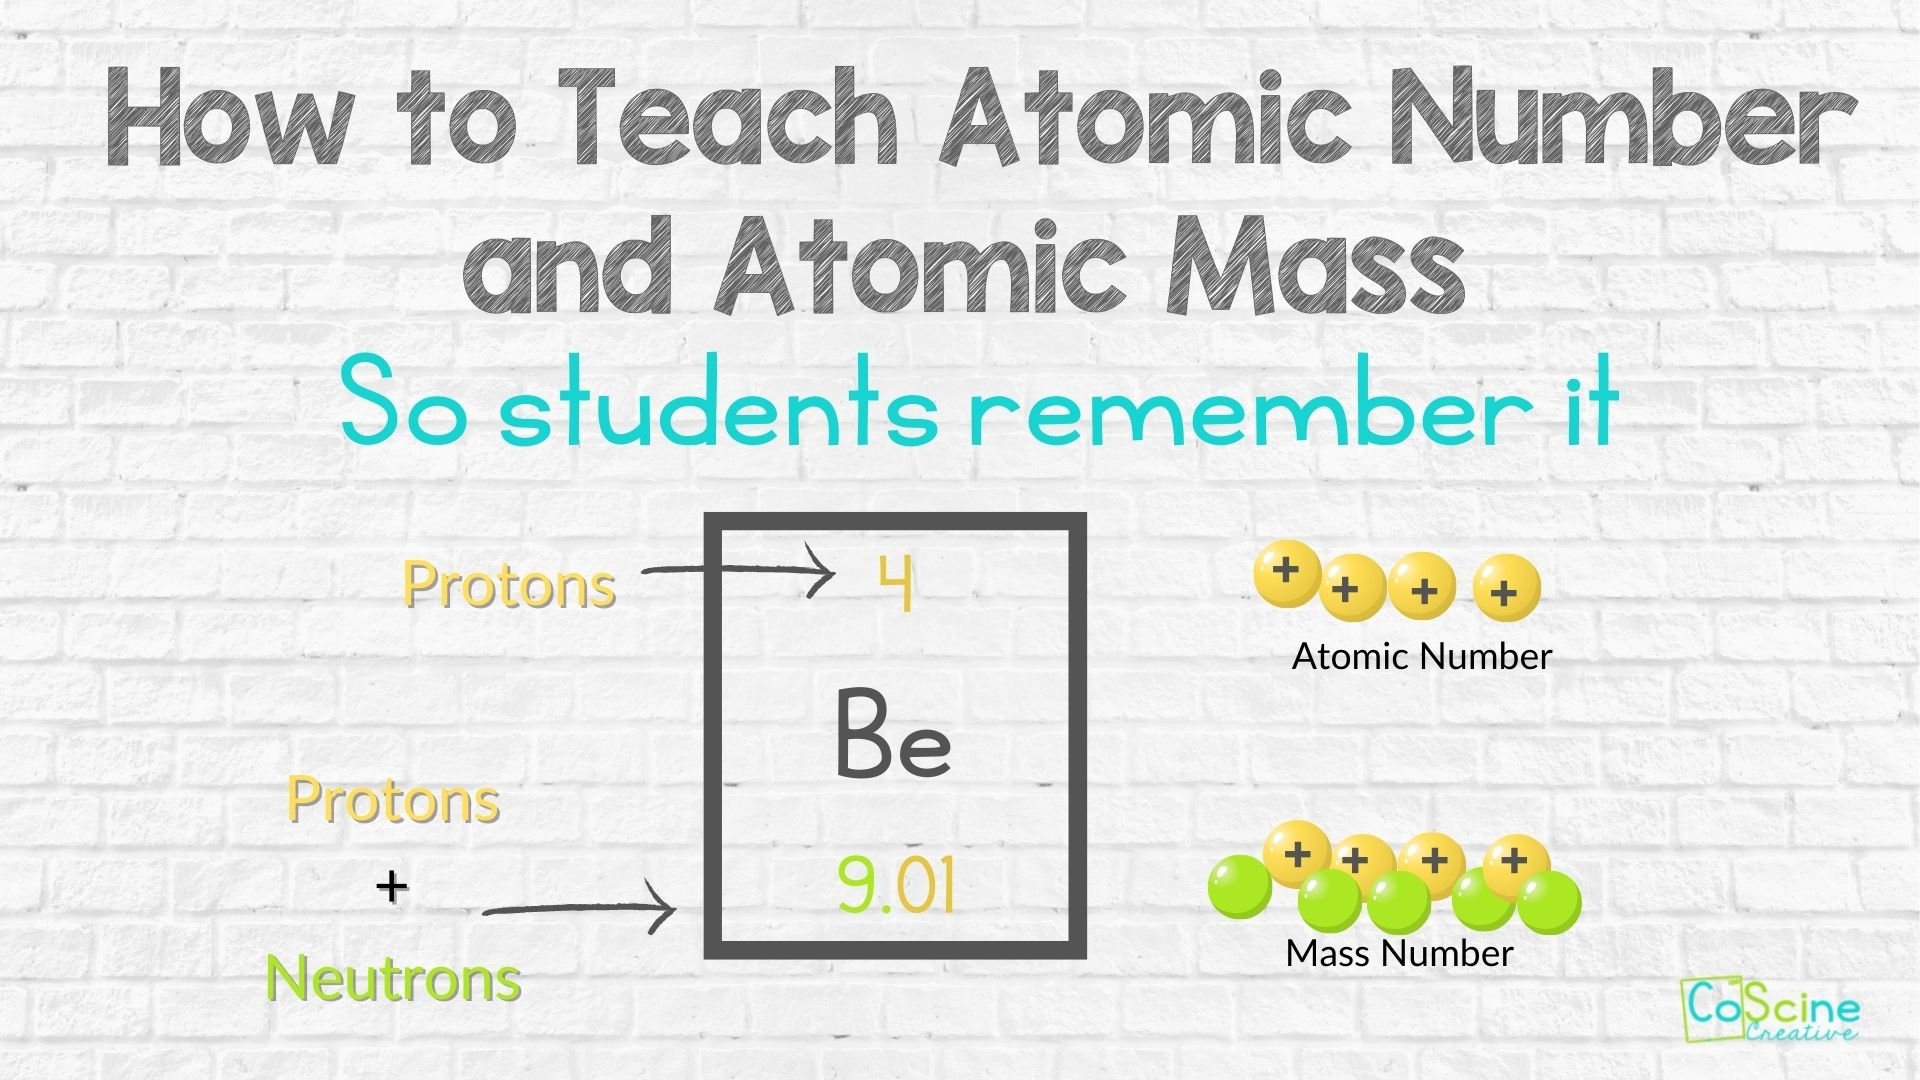 How to Teach Atomic Number and Atomic Mass (So Students Remember it) (Copy)  — CoScine Creative